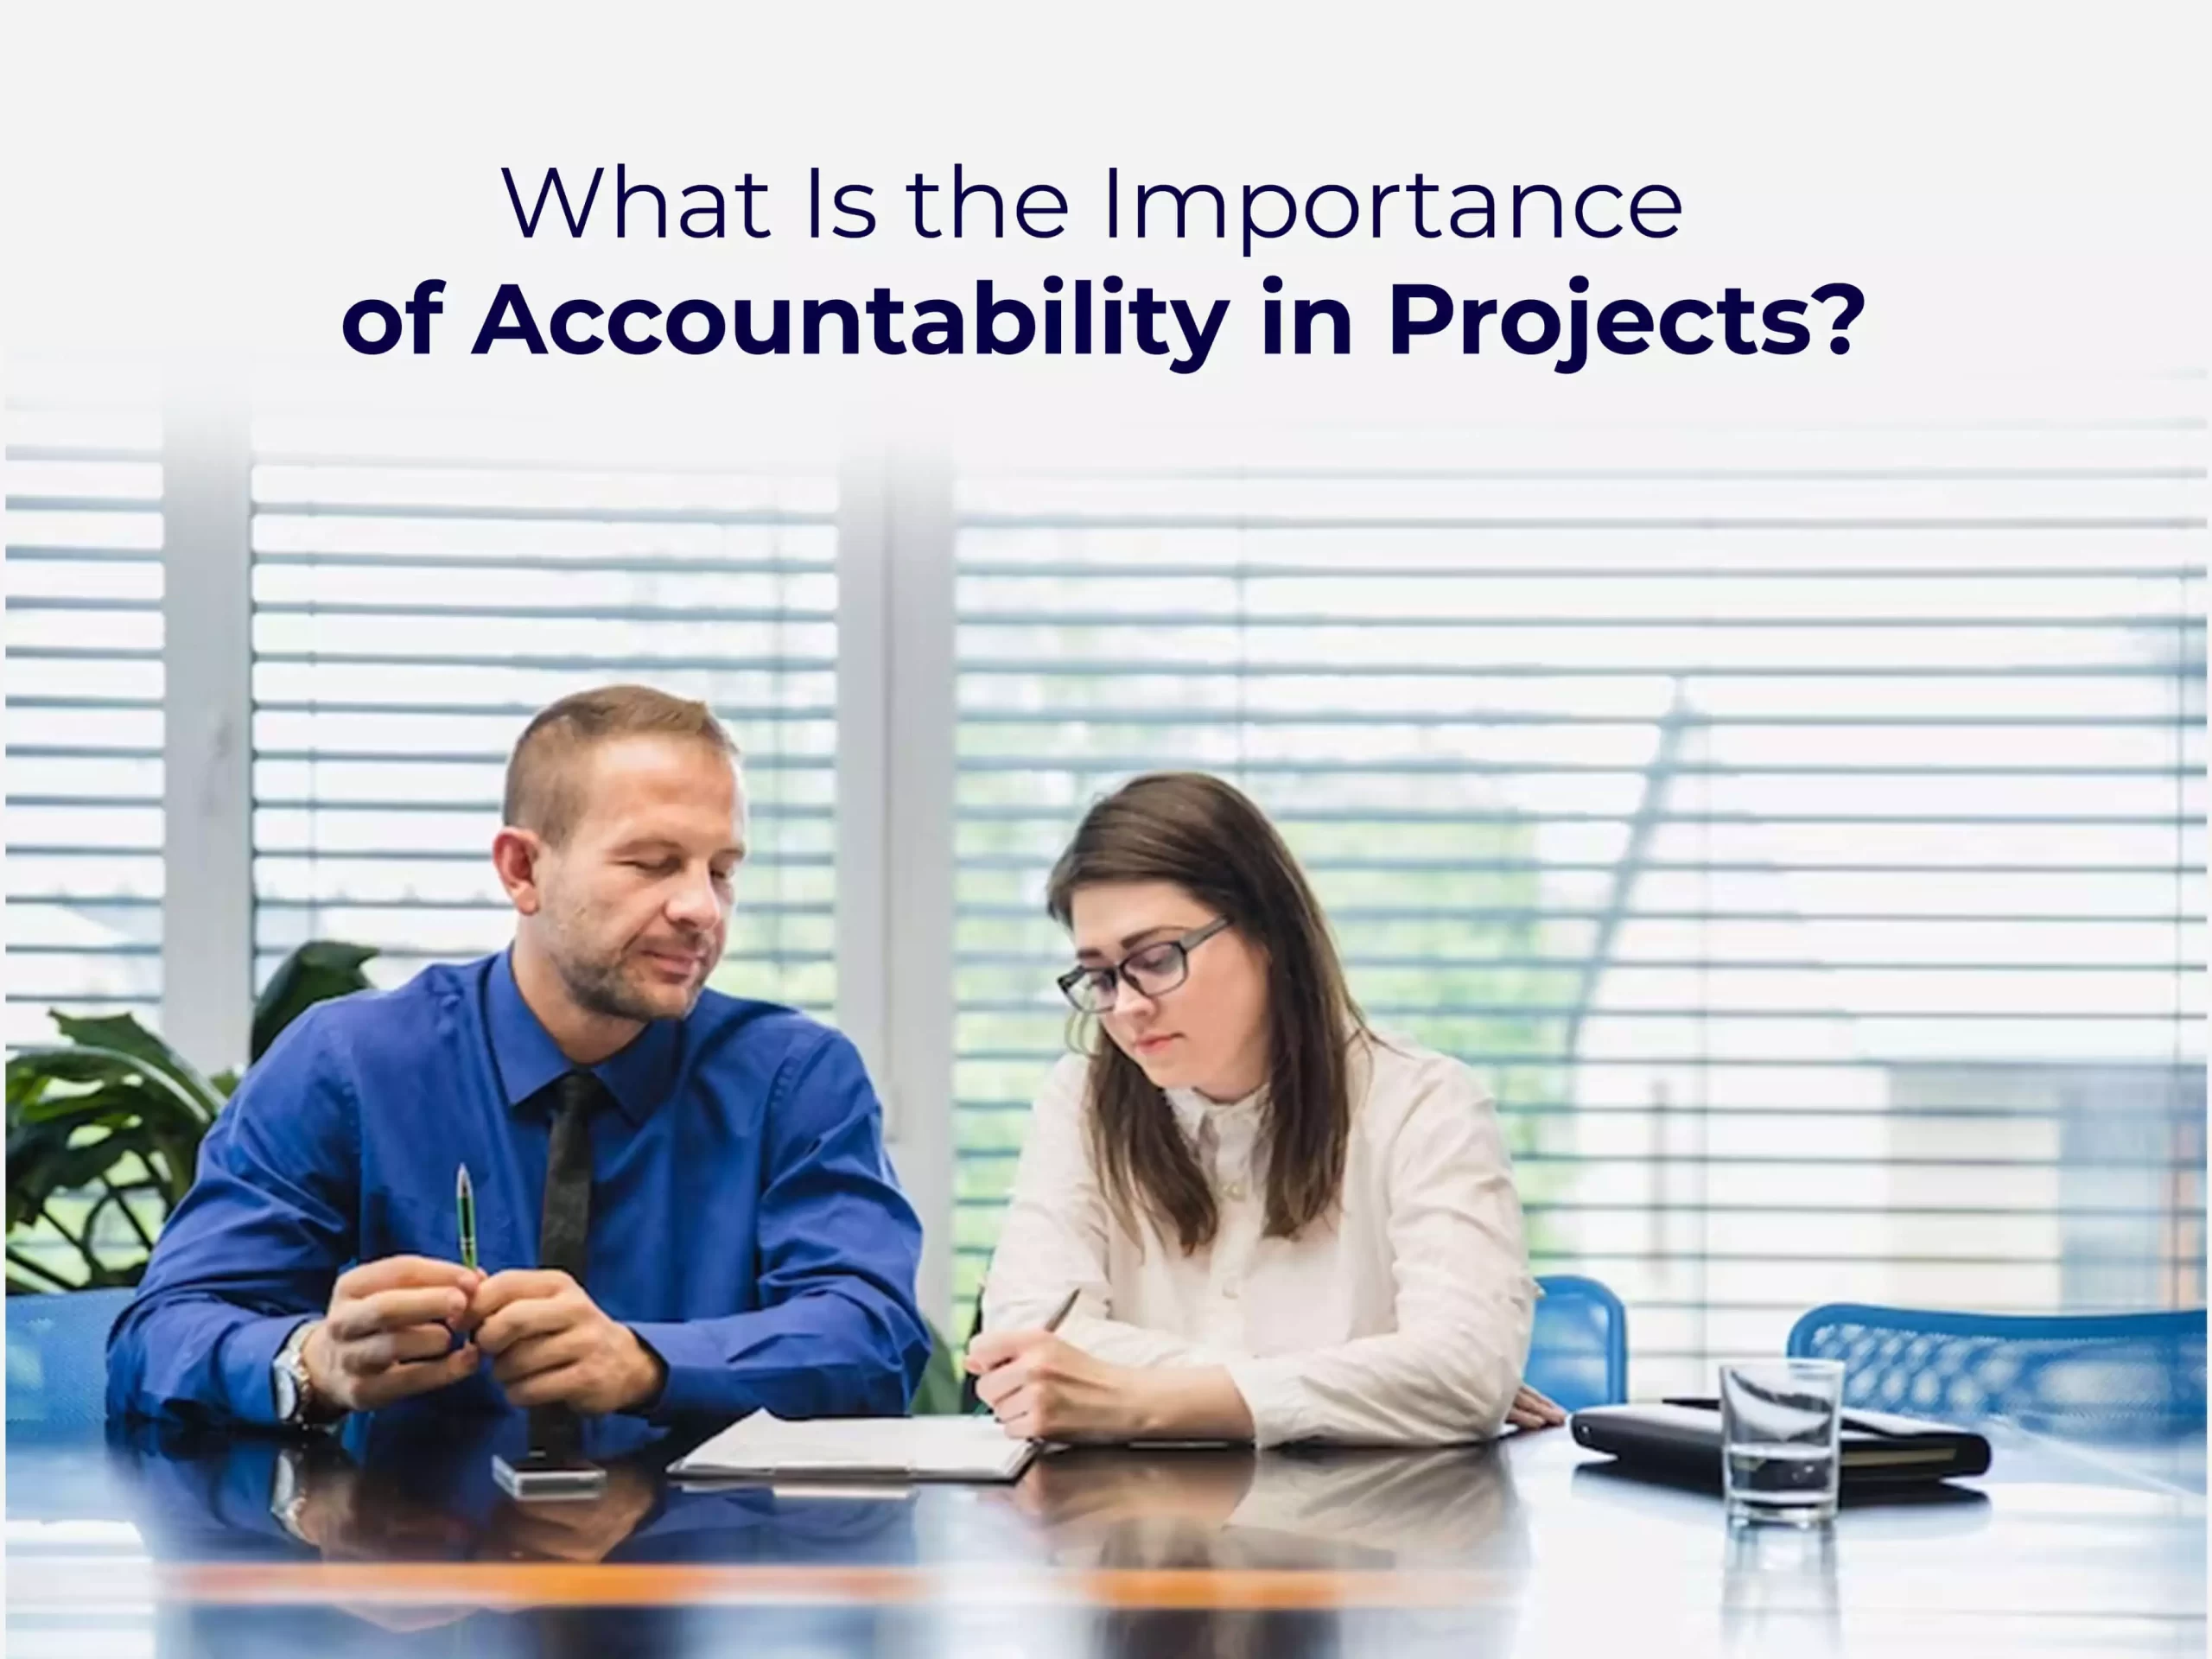 What Is the Importance of Accountability in Projects?